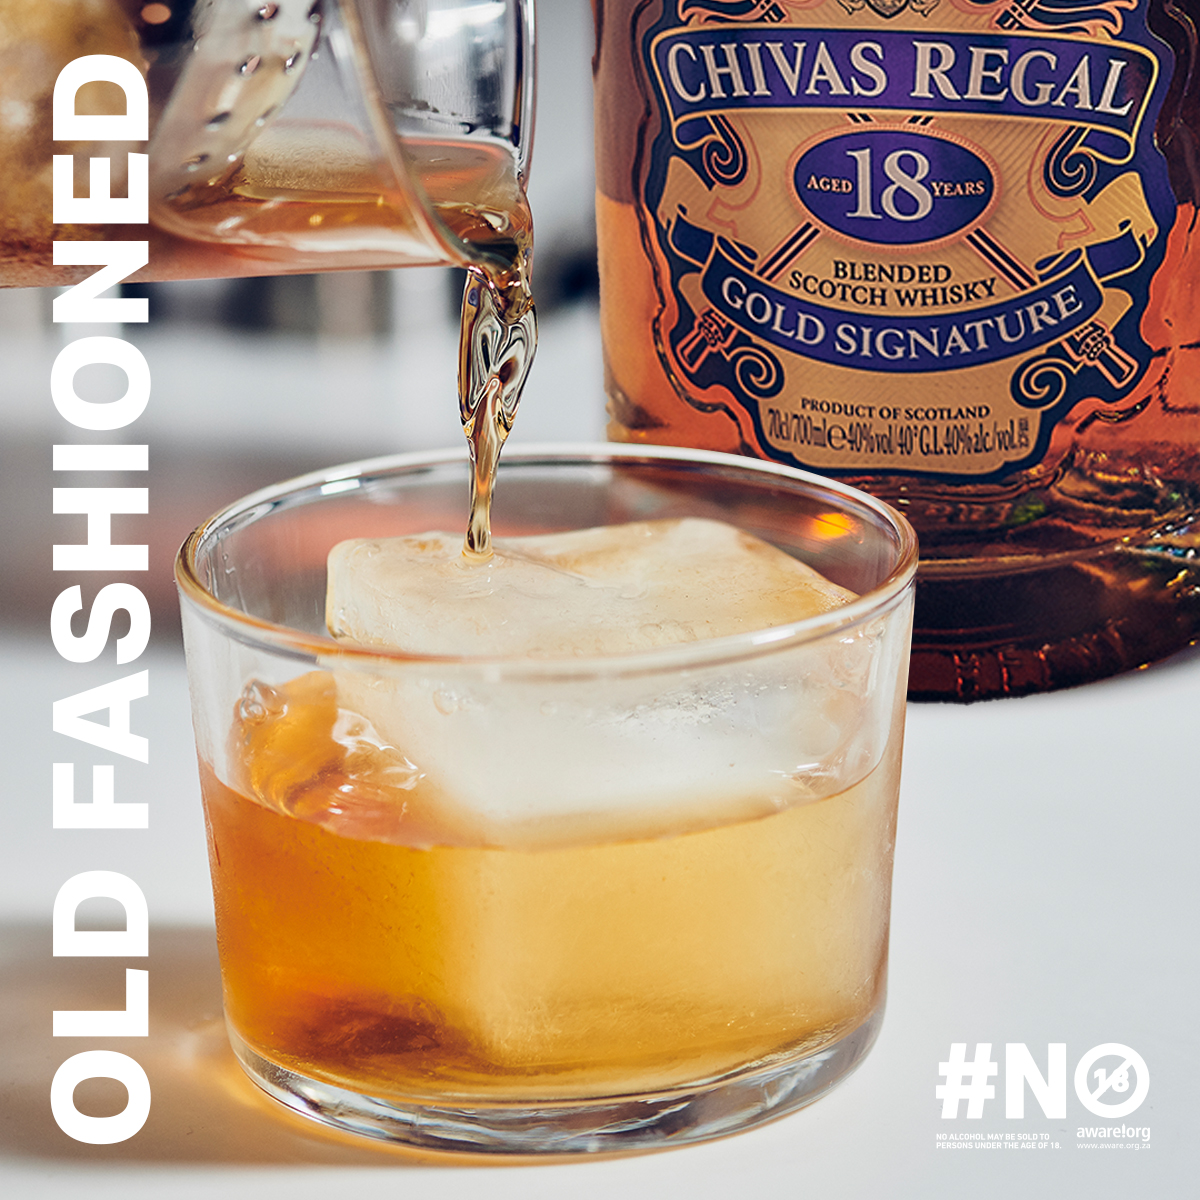 An old-fashioned cocktail with a modern twist. Can you name the Chivas cocktail? ​ Ingredients; Chivas 18, Angostura Bitters, sugar syrup and orange zest to garnish​ Hint: Check out our website :) #iRiseWeRise #ChivasRegalSA #ChivasRegal